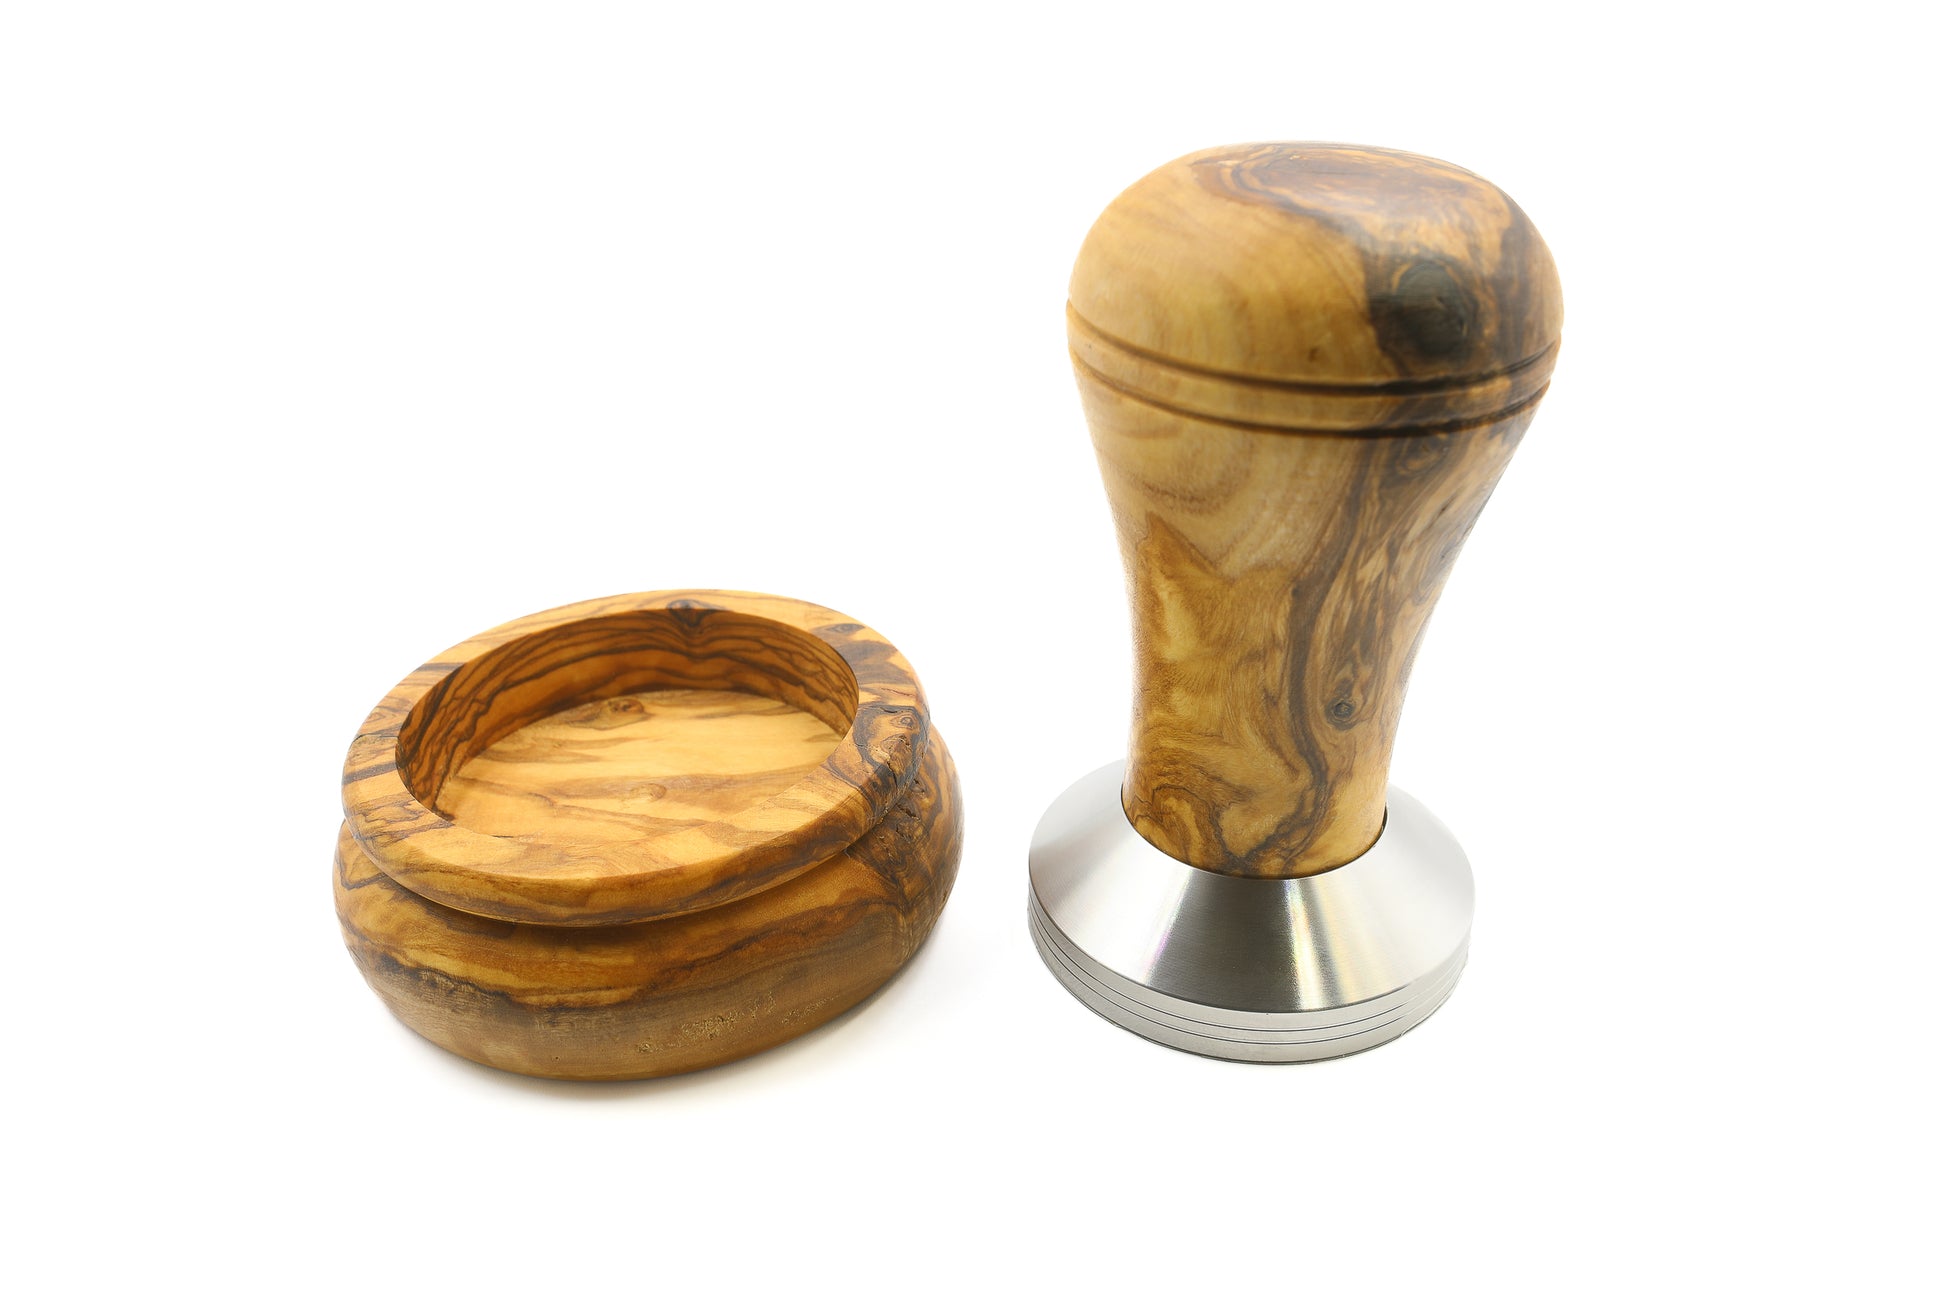 Eco-friendly coffee tamper crafted from olive wood and stainless steel, including a holder